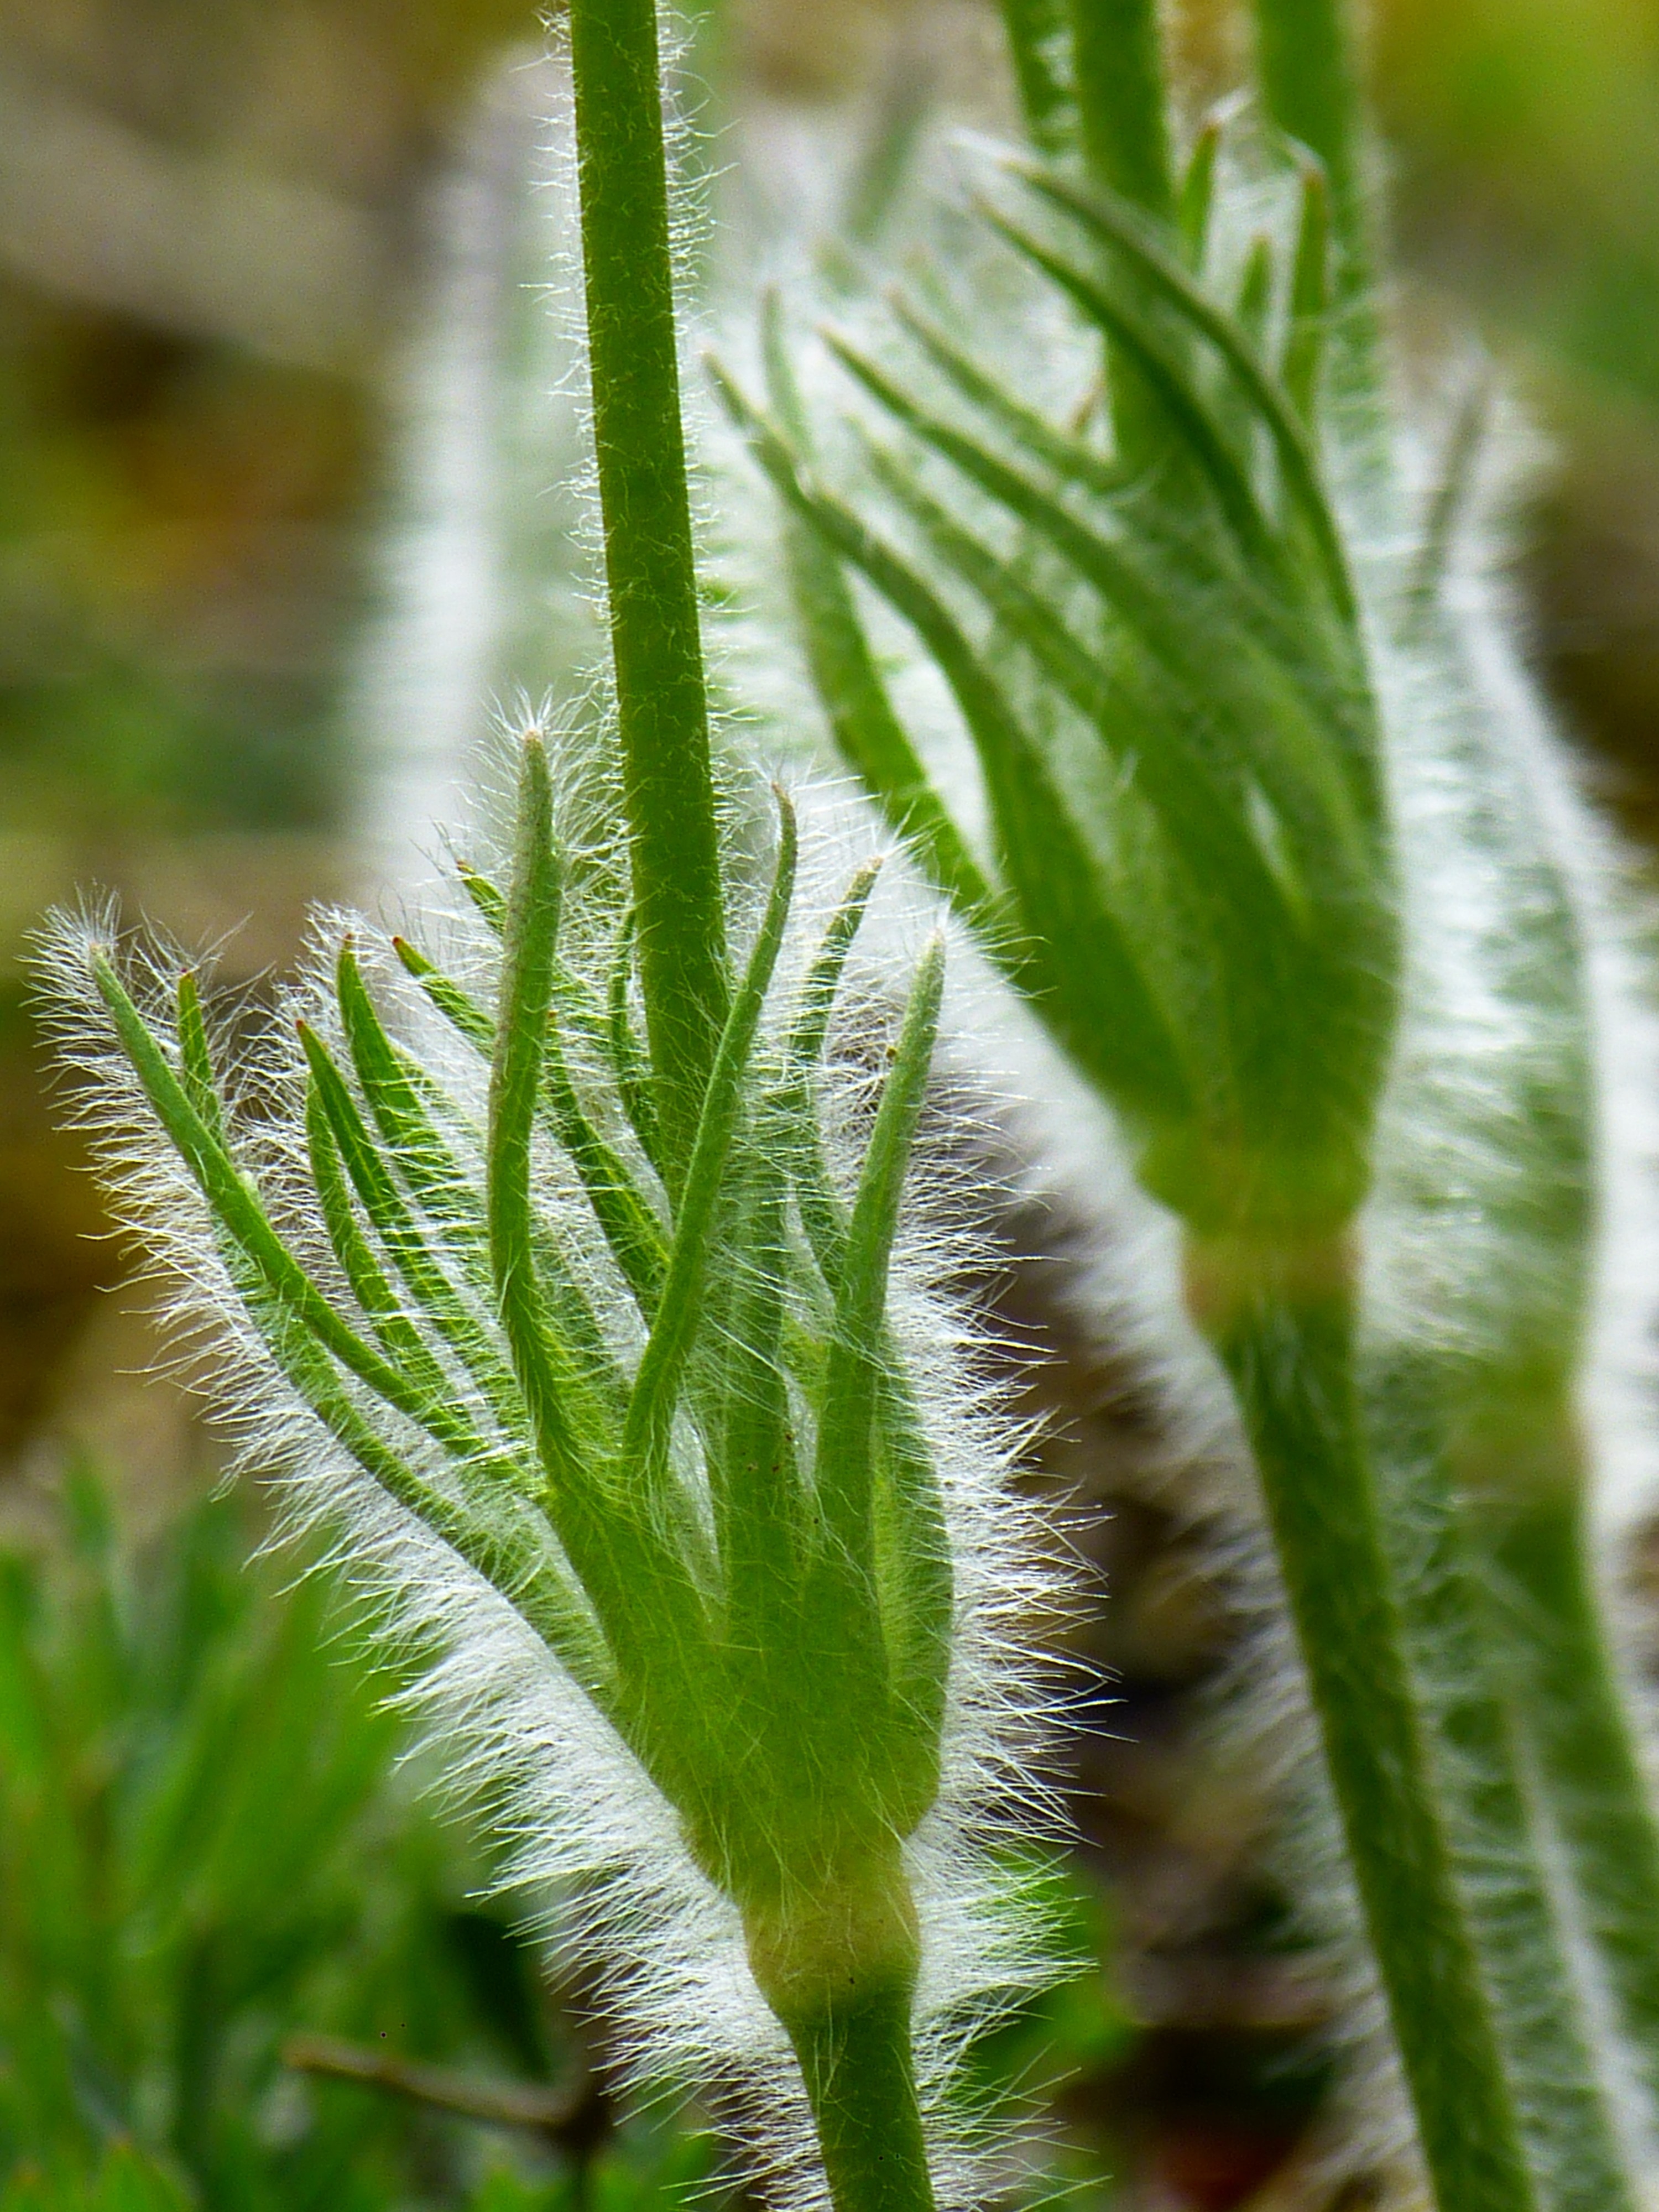 Pasque Flower, Hairy, Leaves, leaf, green color